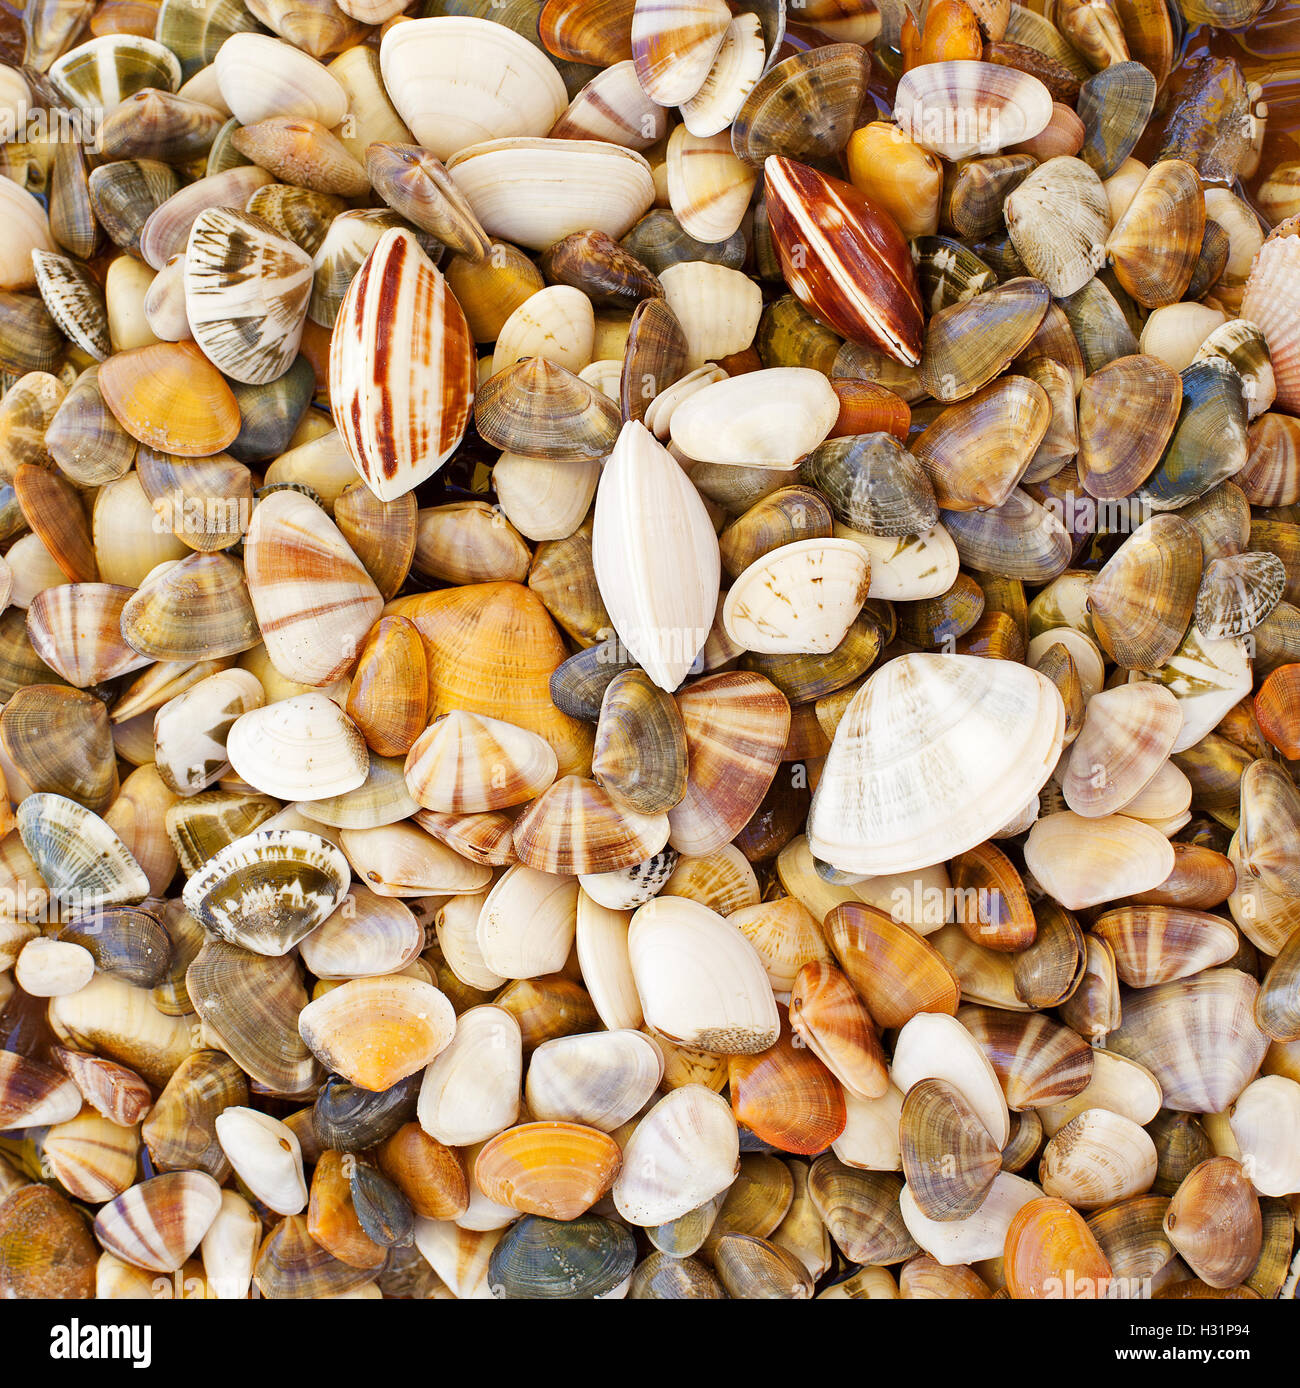 Fresh clams, mussels background. Stock Photo